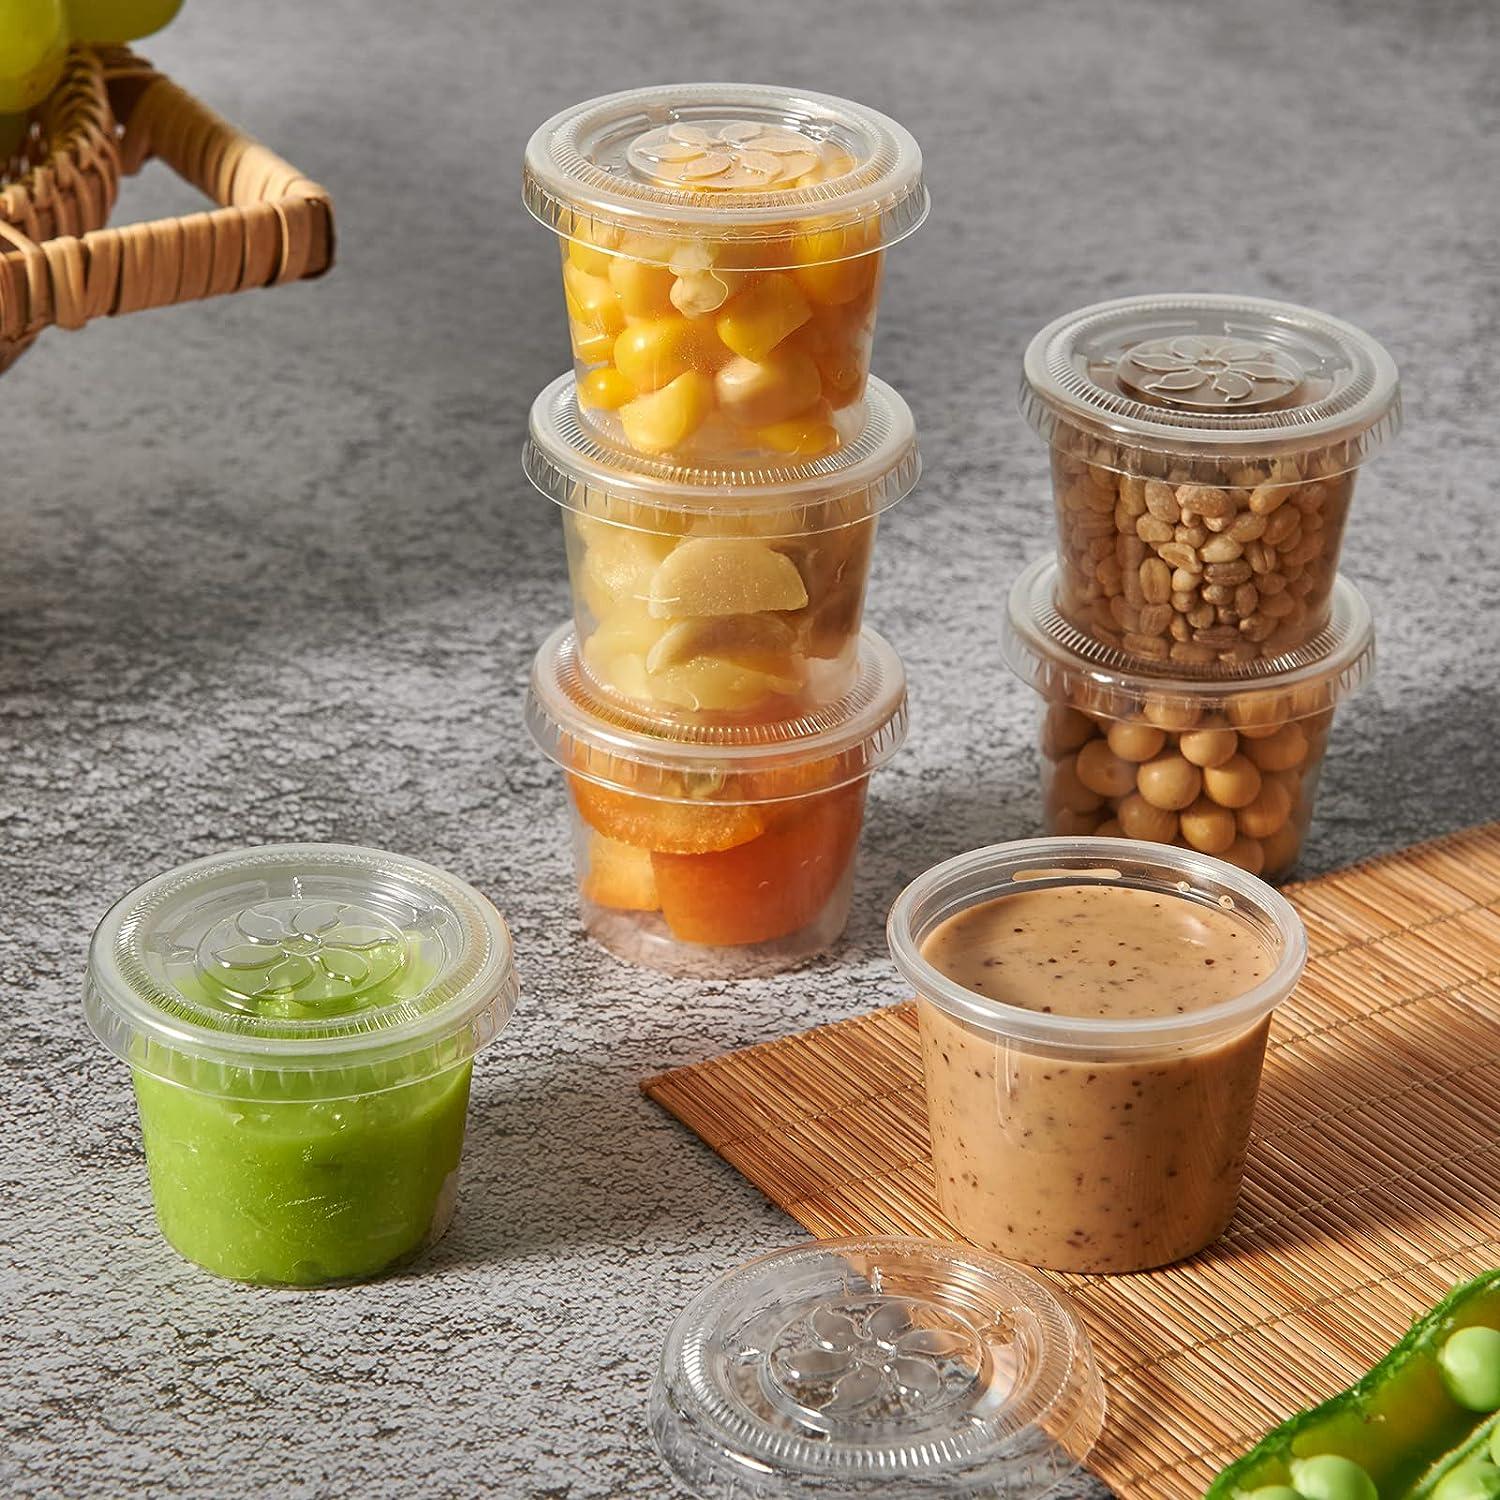 Condiment Cups Containers with Lid Salad Dressing Container to go Small  Mini Food Storage Containers with